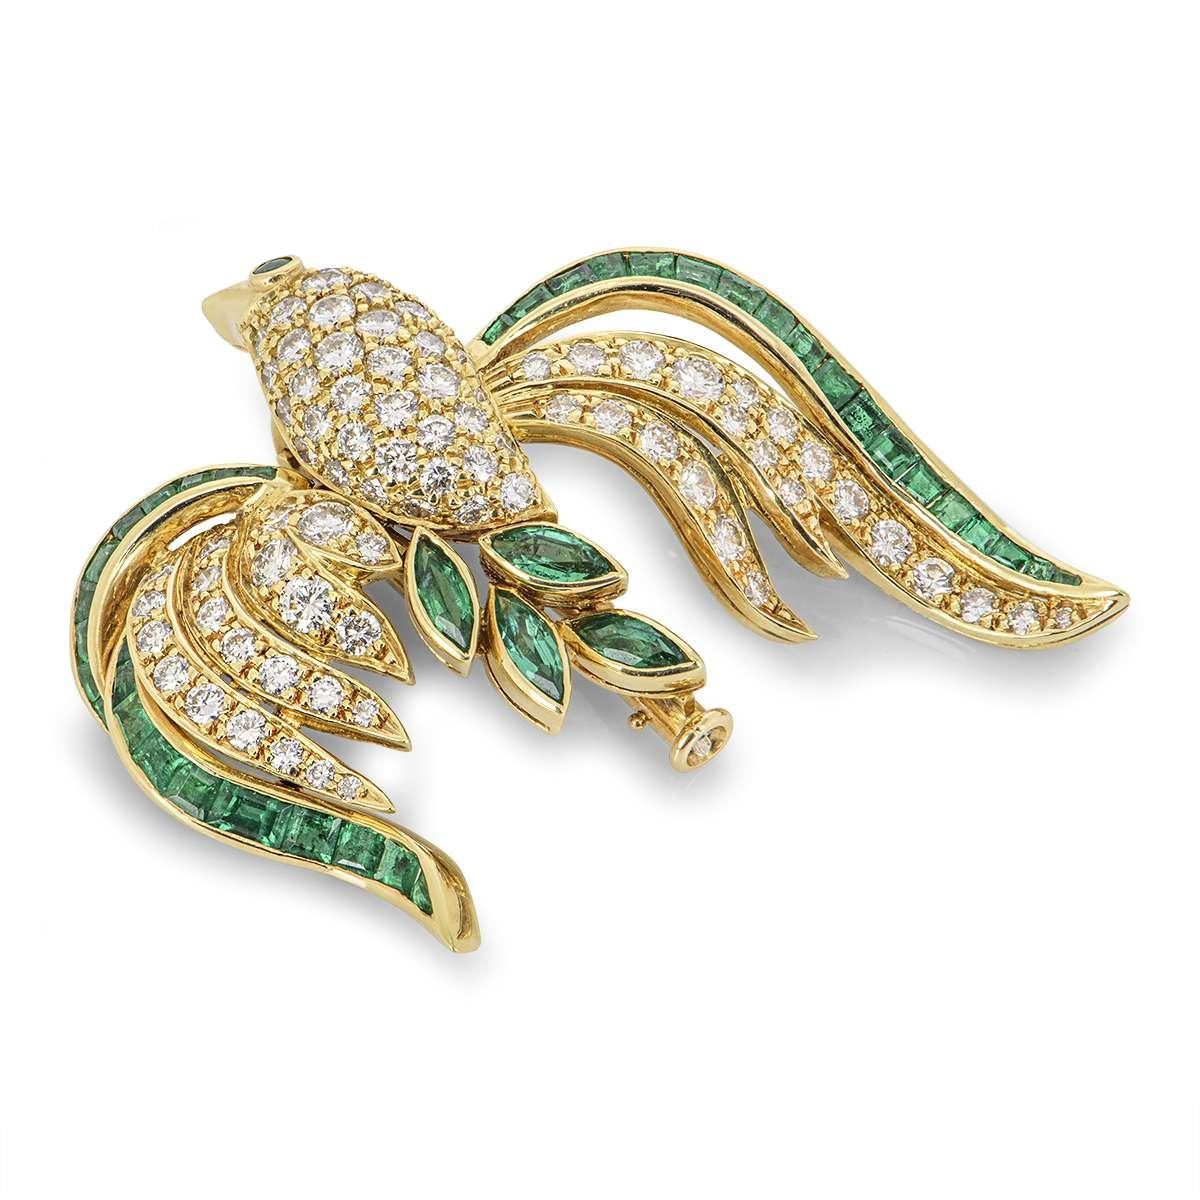 A unique 18k yellow gold diamond and emerald brooch. The brooch comprises of a bird motif with moving wings. The motif has 81 round brilliant cut diamonds in a pave setting through the body and wings with a round brilliant cut emerald as the bird's